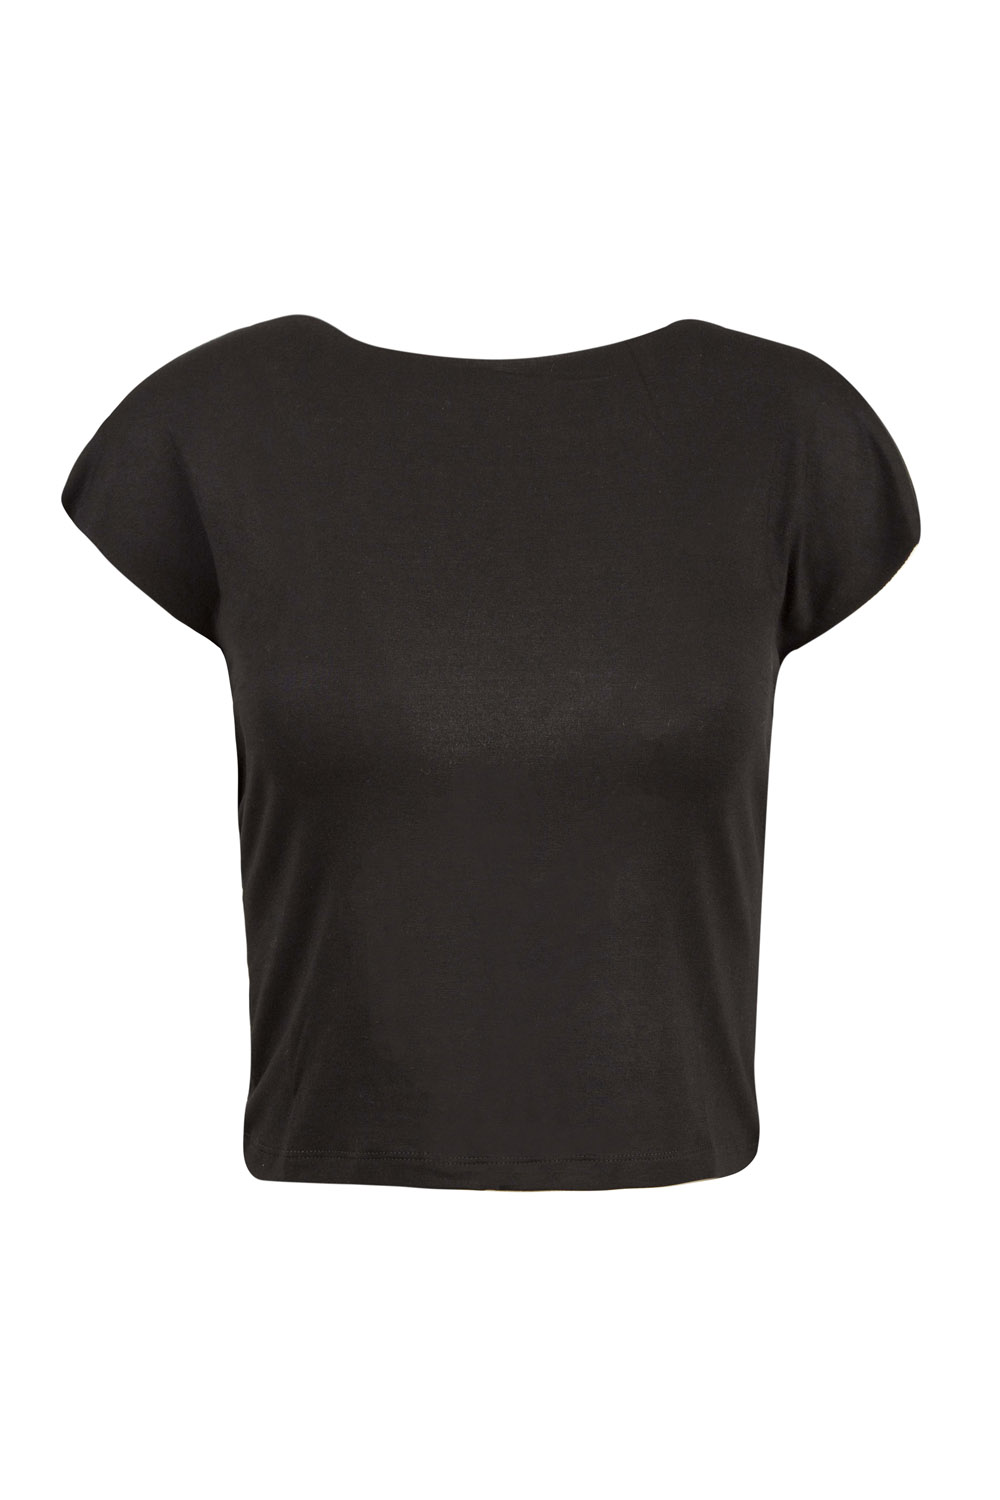 Cropped Top with Ruched Back